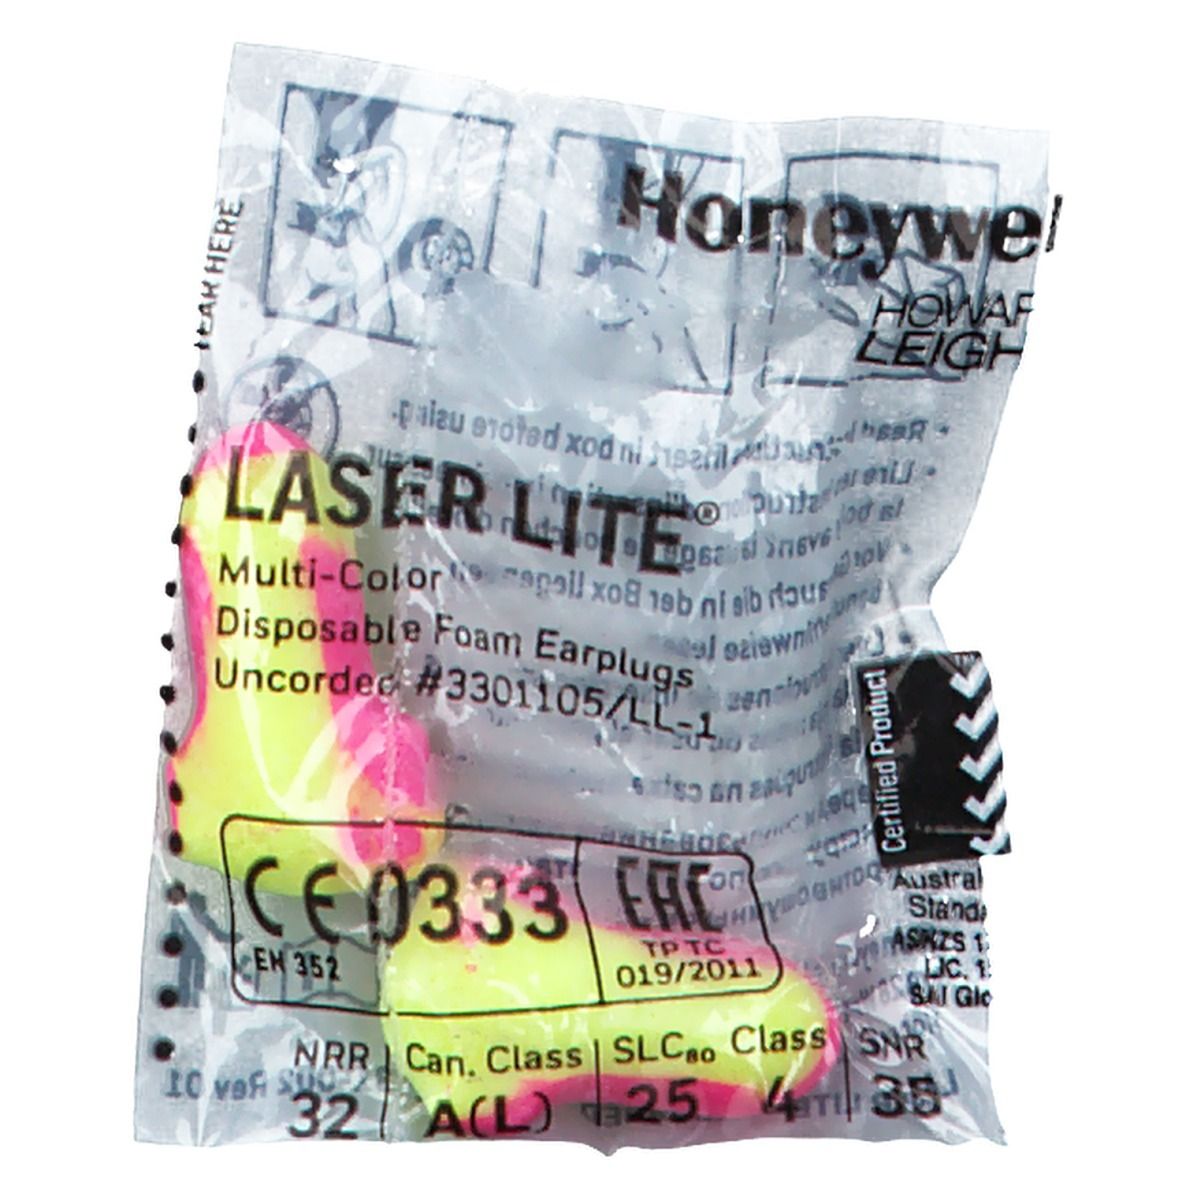 Howard Leight® Laser Lite hearing protection plug